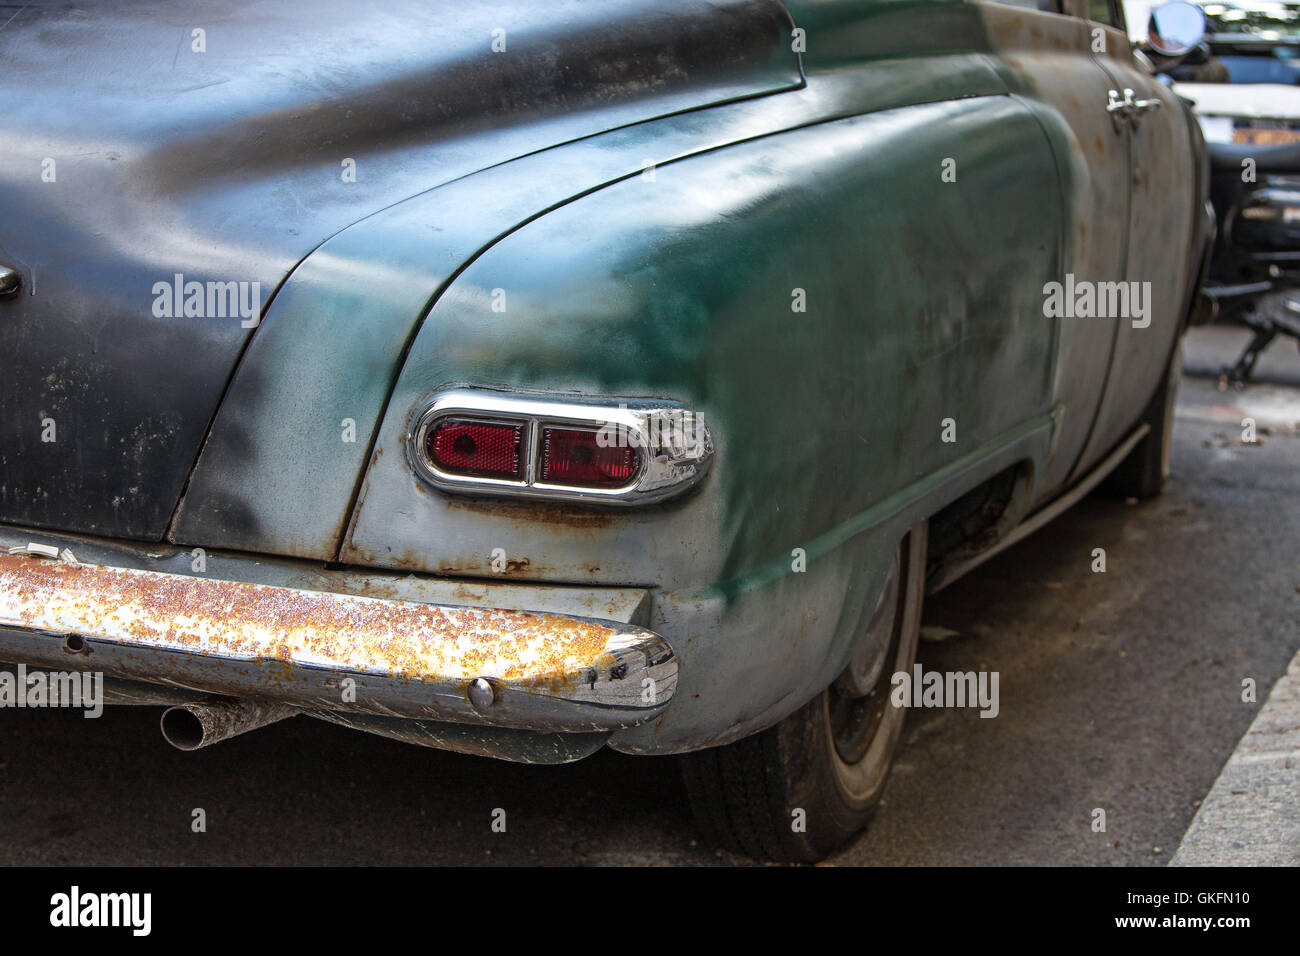 Rear view of an old vintage car in need of restoration. Stock Photo